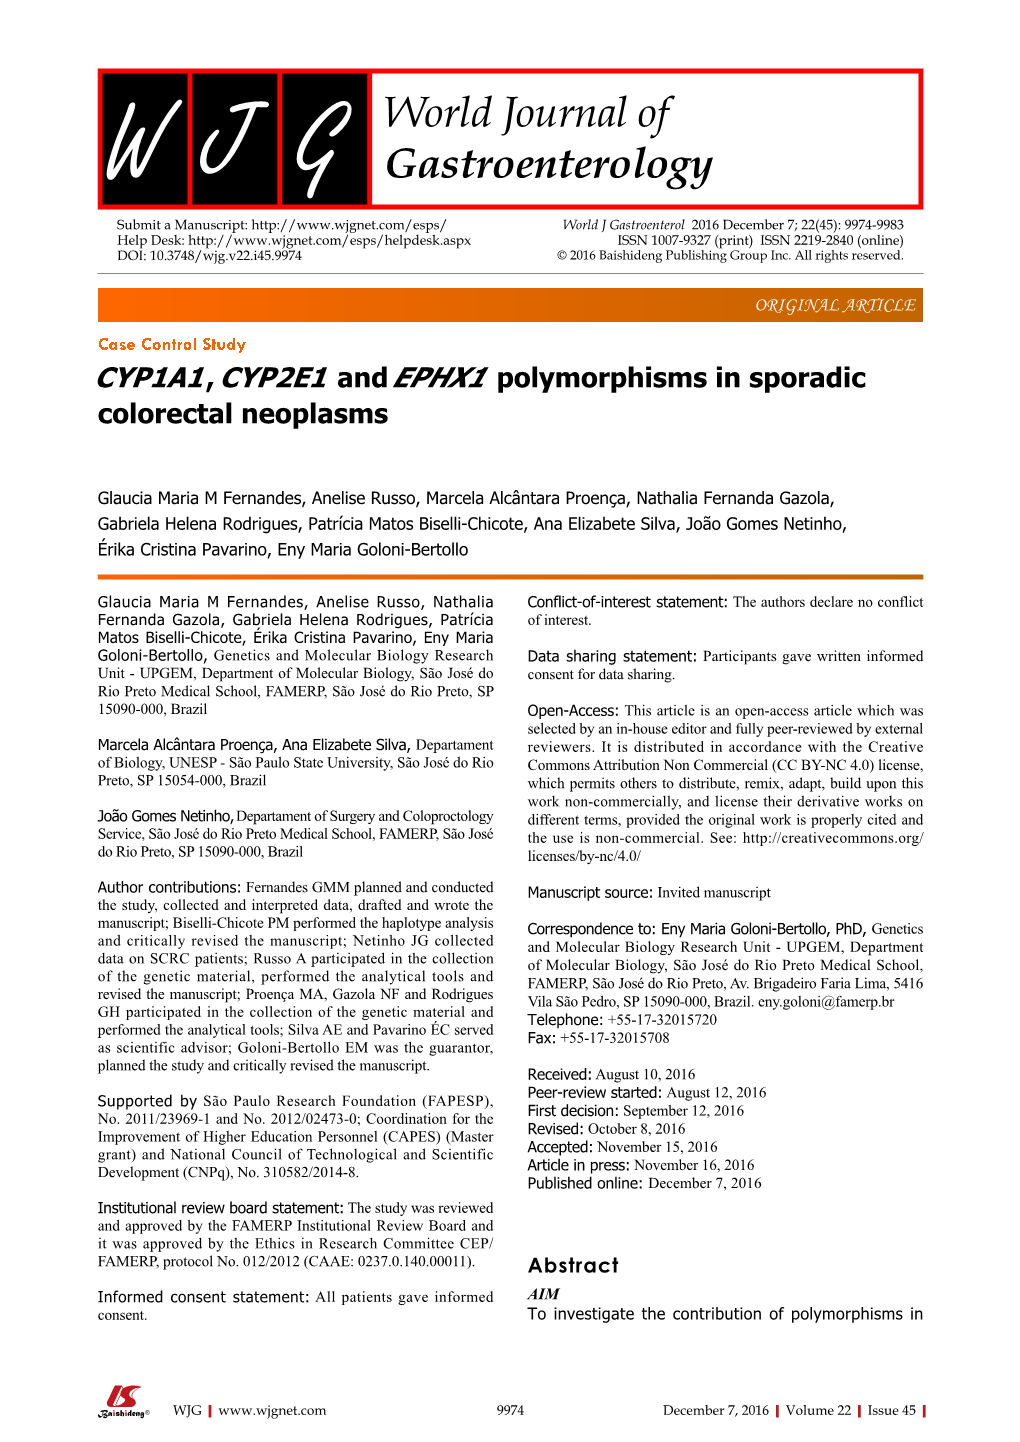 CYP1A1, CYP2E1 and EPHX1 Polymorphisms in Sporadic